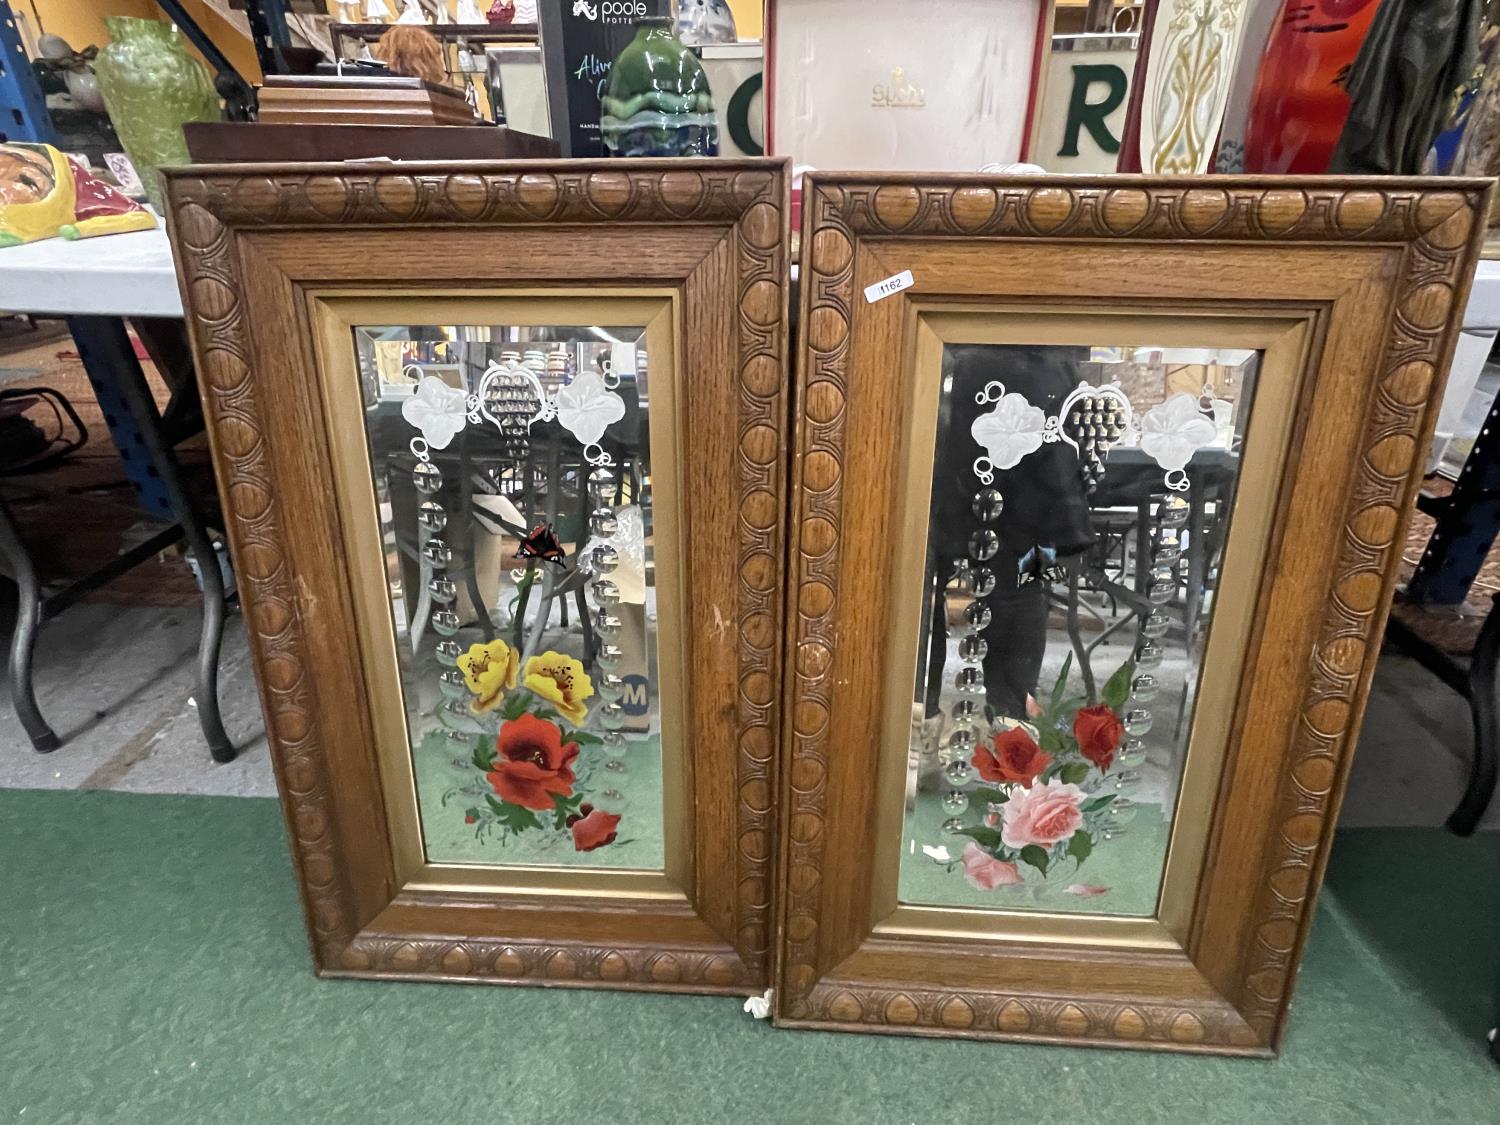 TWO OAK FRAMED DECORATIVE MIRRORS WITH FLOWERS AND BUTTERFLIES 20" X 33" - Image 2 of 6